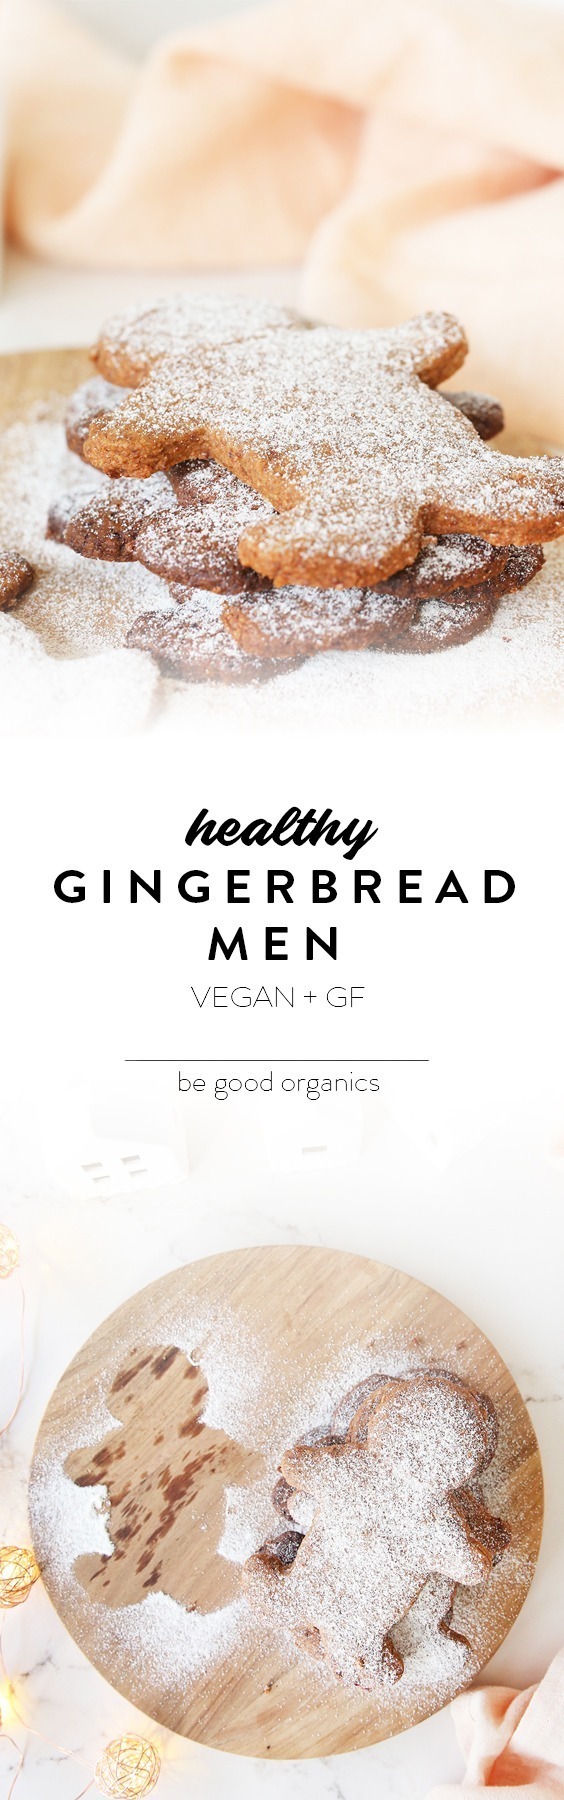 Healthy vegan gingerbread men did you say? These are for you (or your homemade gifts)! Think buttery crumbly shortbread, spiced with Mr Claus’s favourites, made extra spesh thanks to a few secret additions. Vegan, dairy free, low sugar + no refined sugar.